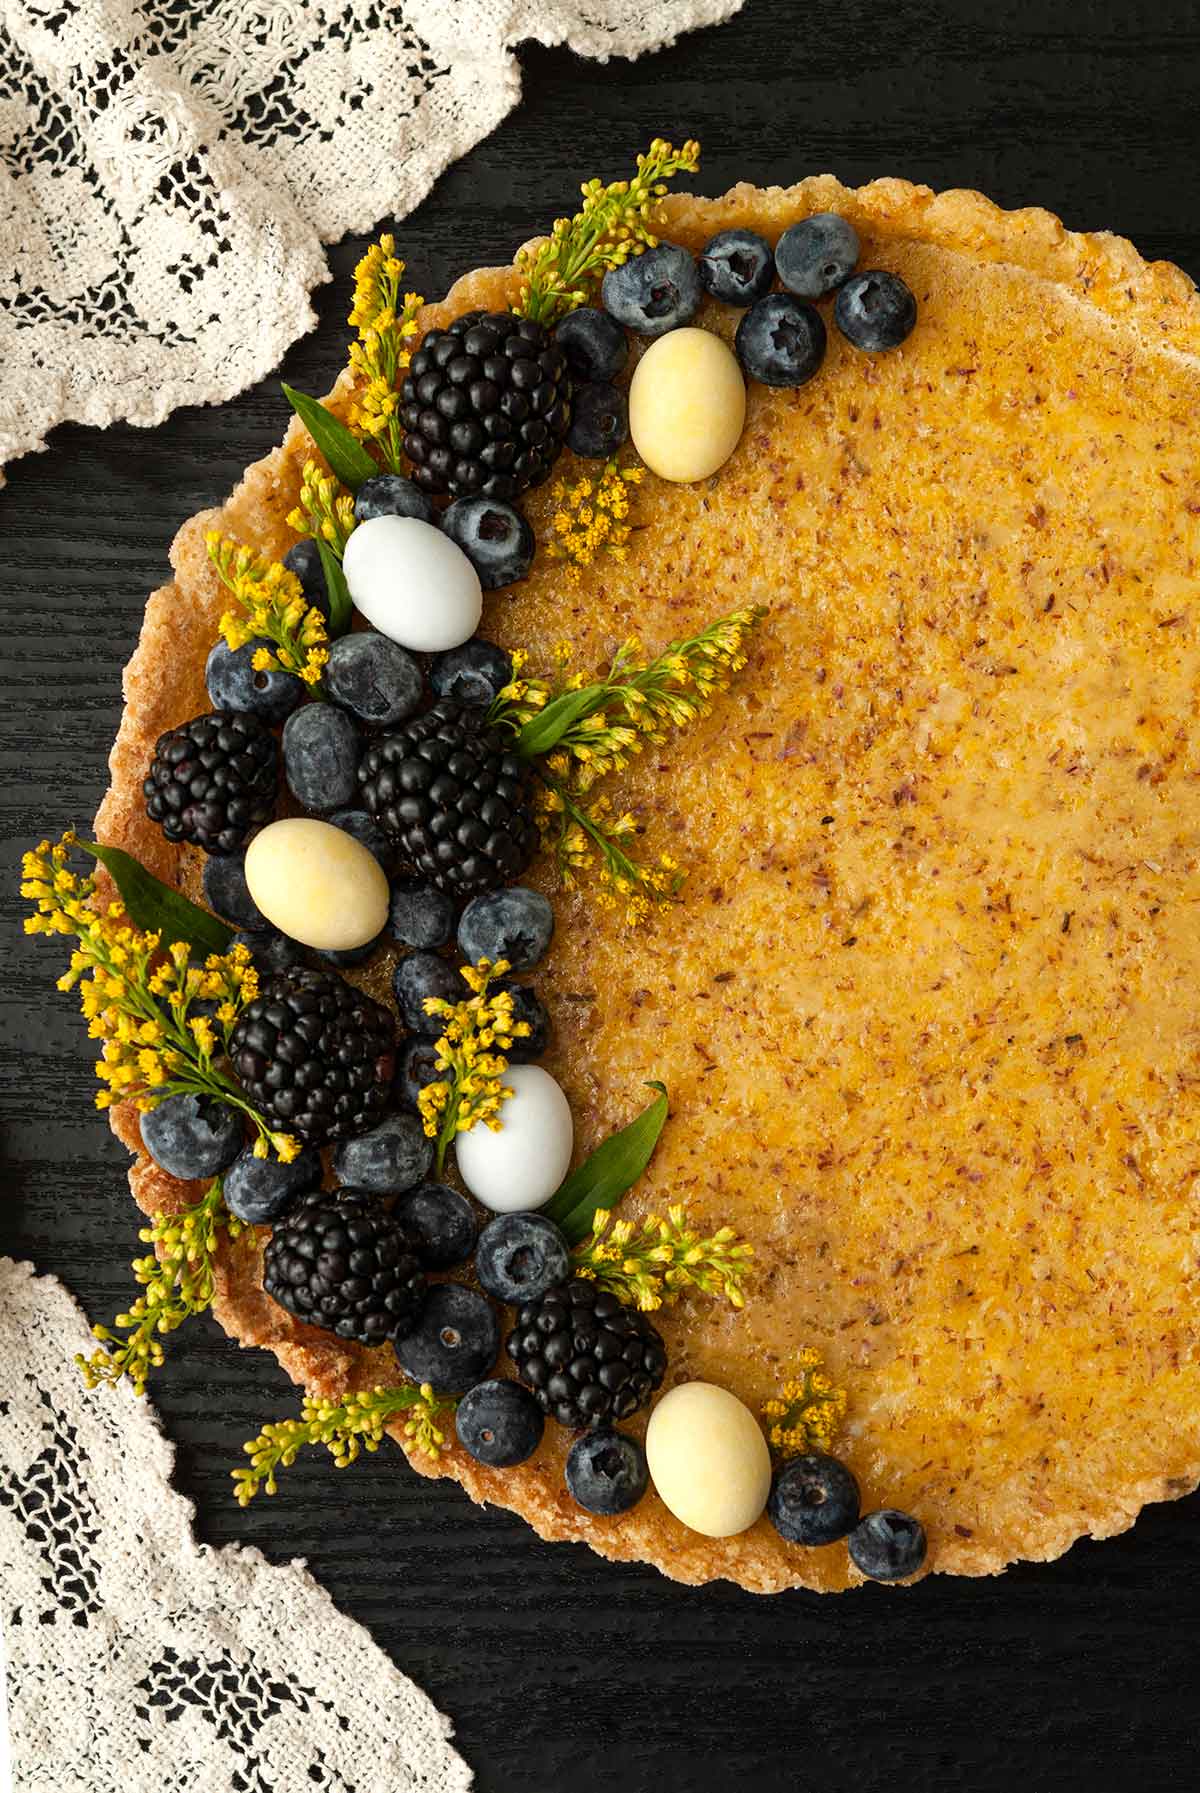 A lavender lemon Easter tart, garnished with flowers, berries and chocolate eggs on a table with a lace cloth.